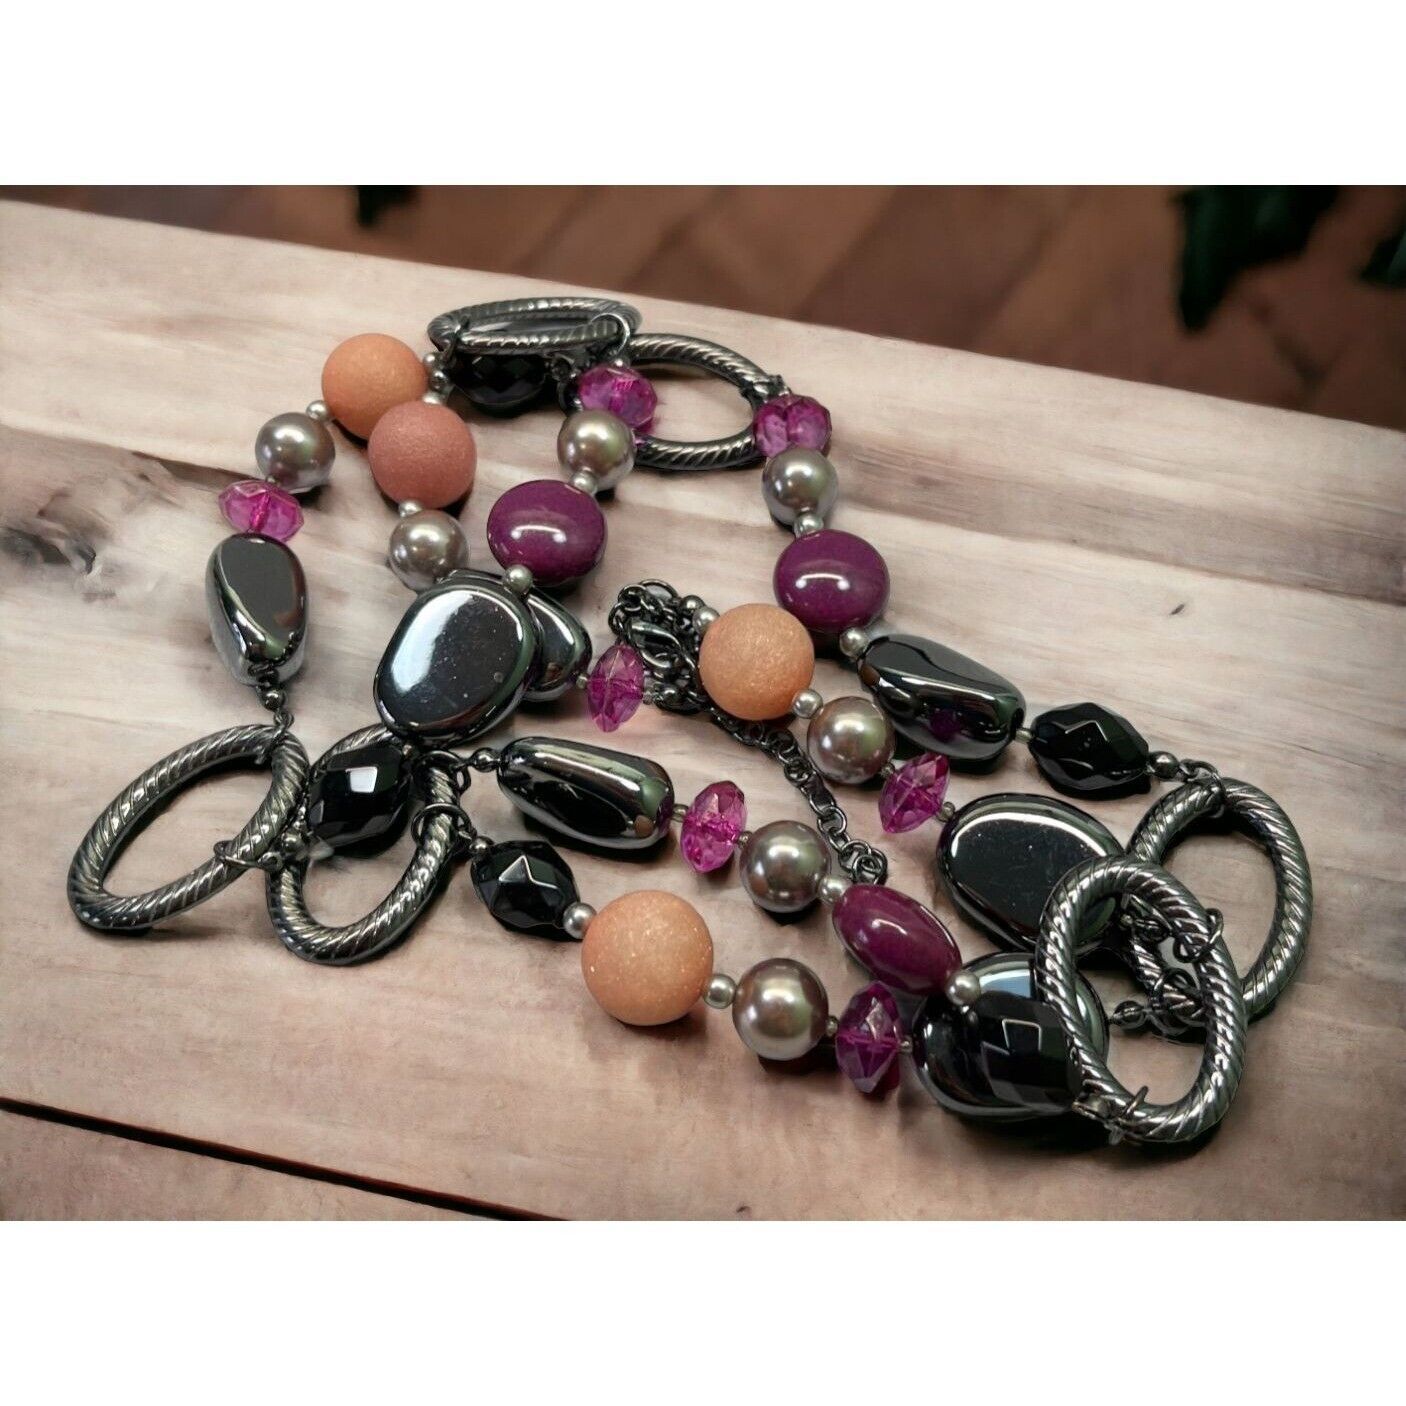 Premier Designs Beaded Necklace Chunky Mixed Media Purple Black Glossy 32 Inch - $18.98